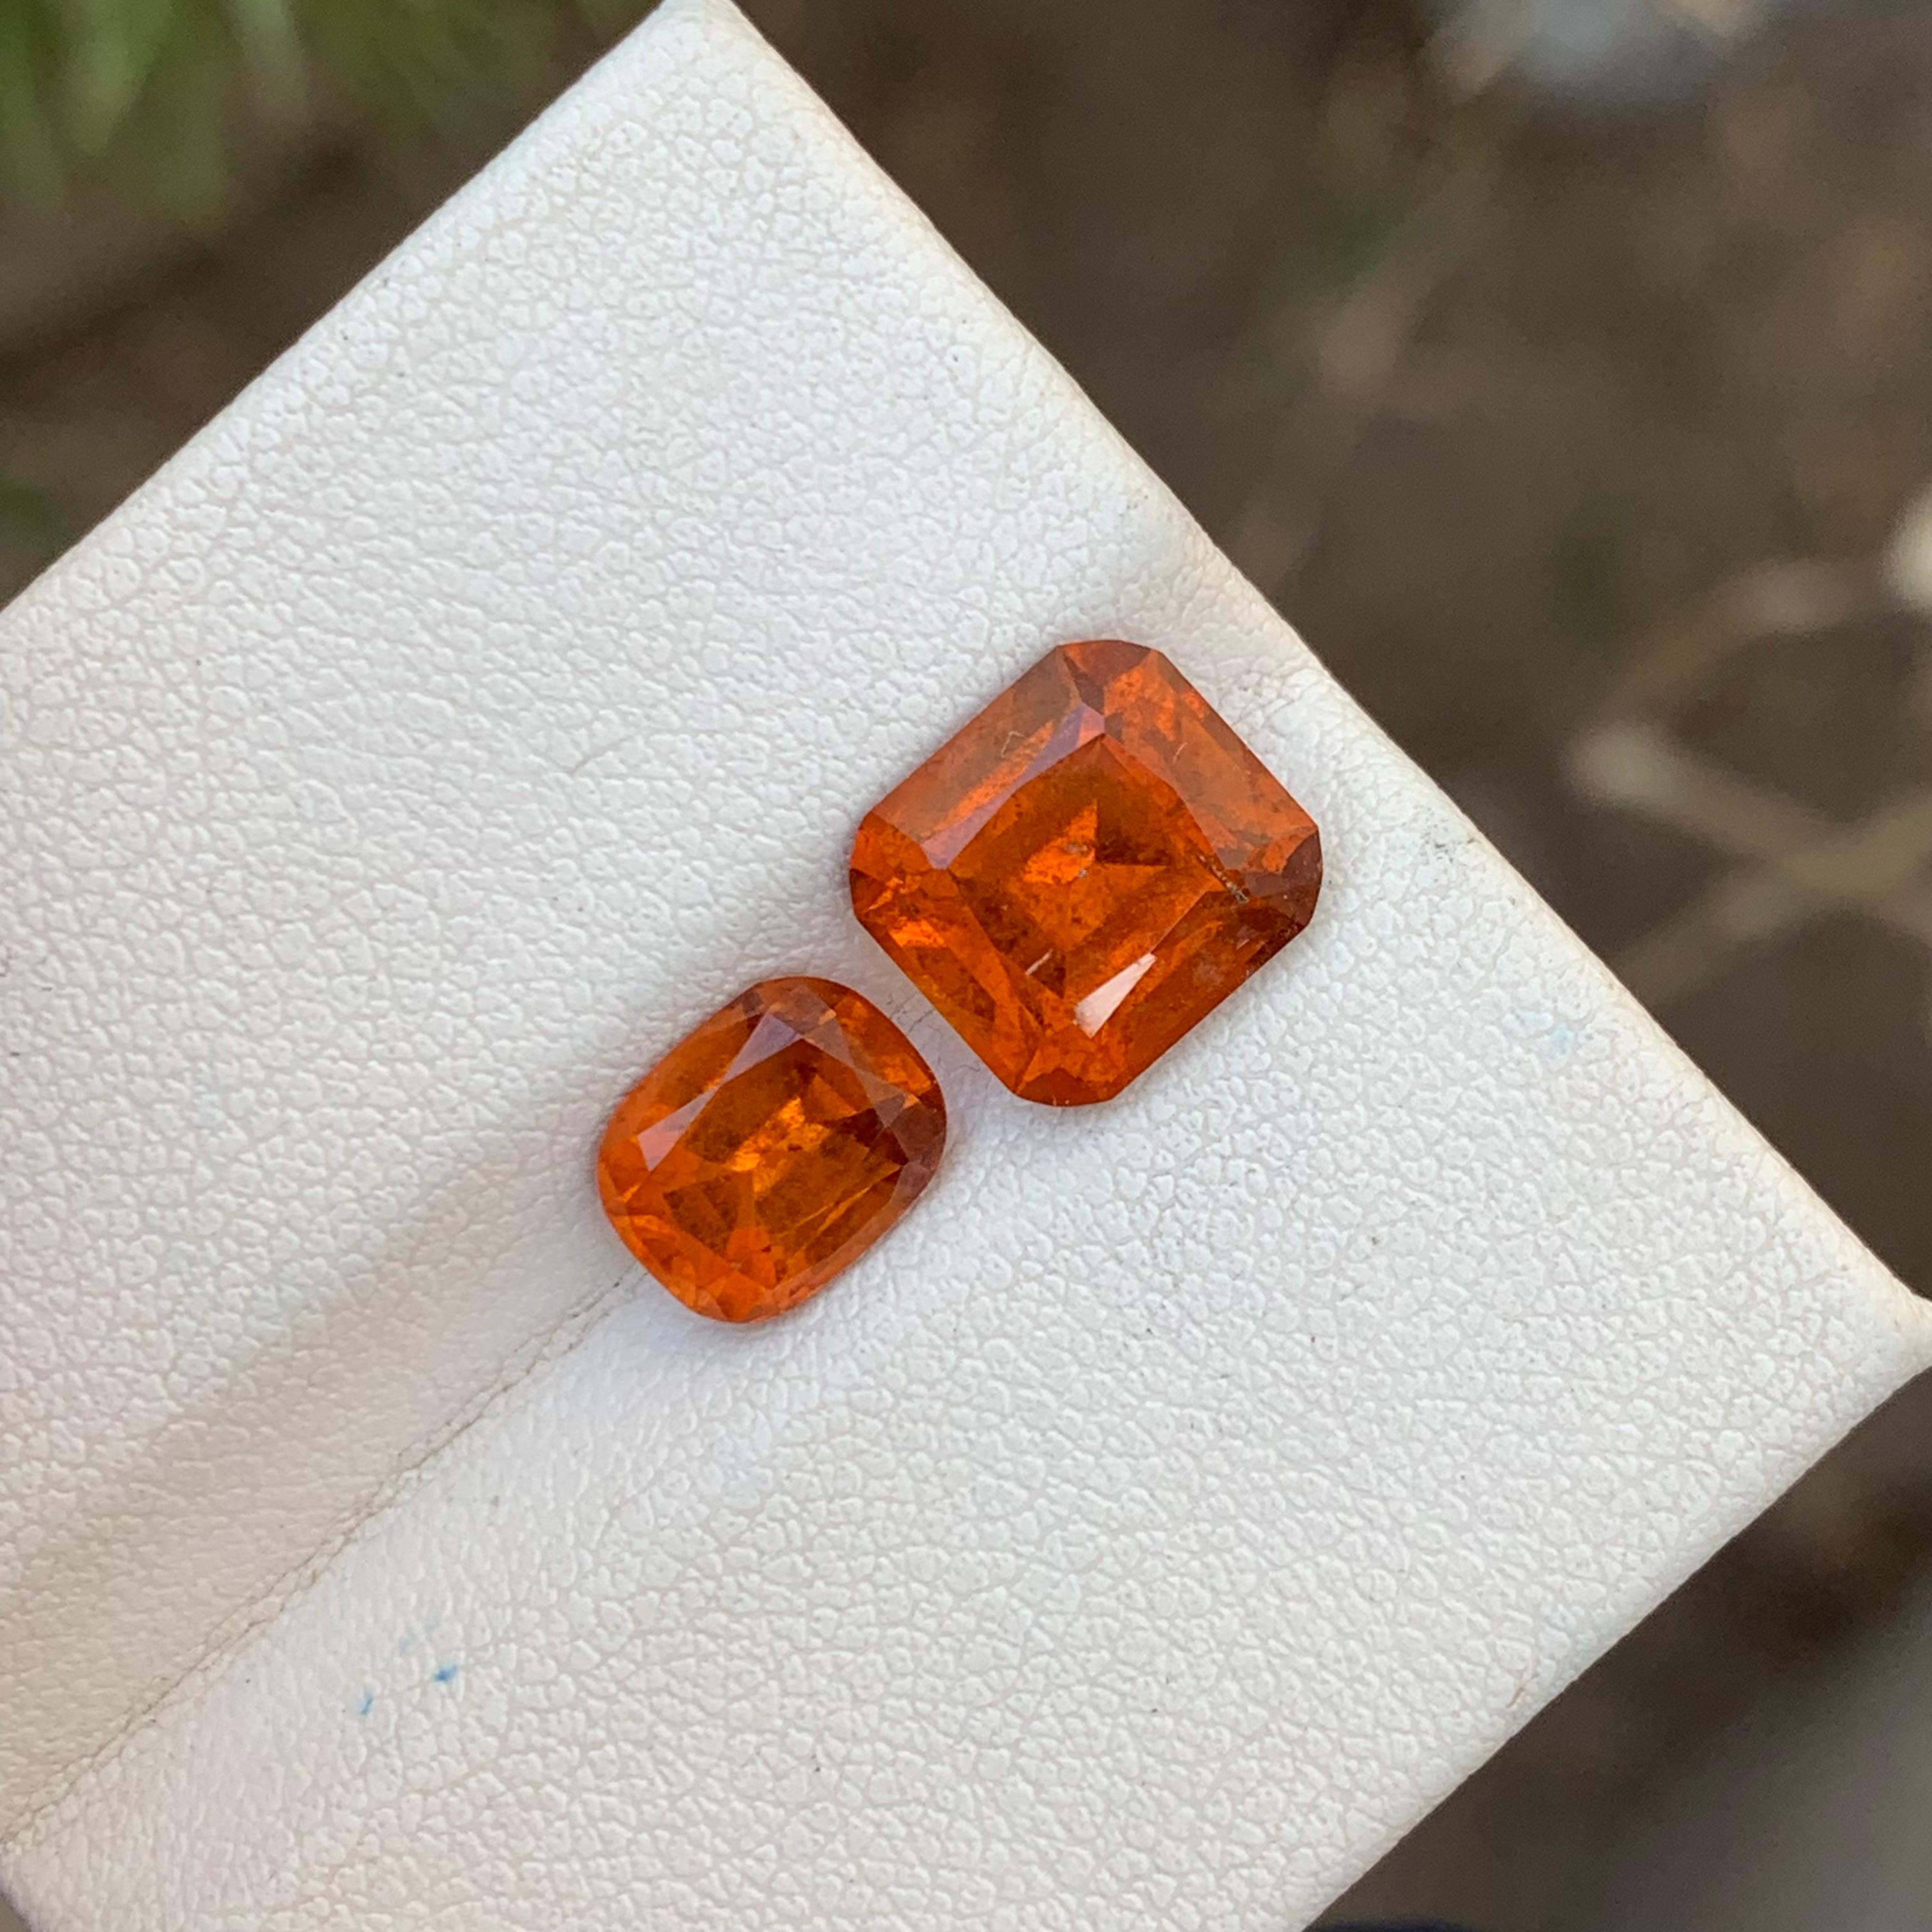 5.95 Carats Natural Loose Hessonite Garnet 2 Pieces For Ring Jewelry Making  en vente 5